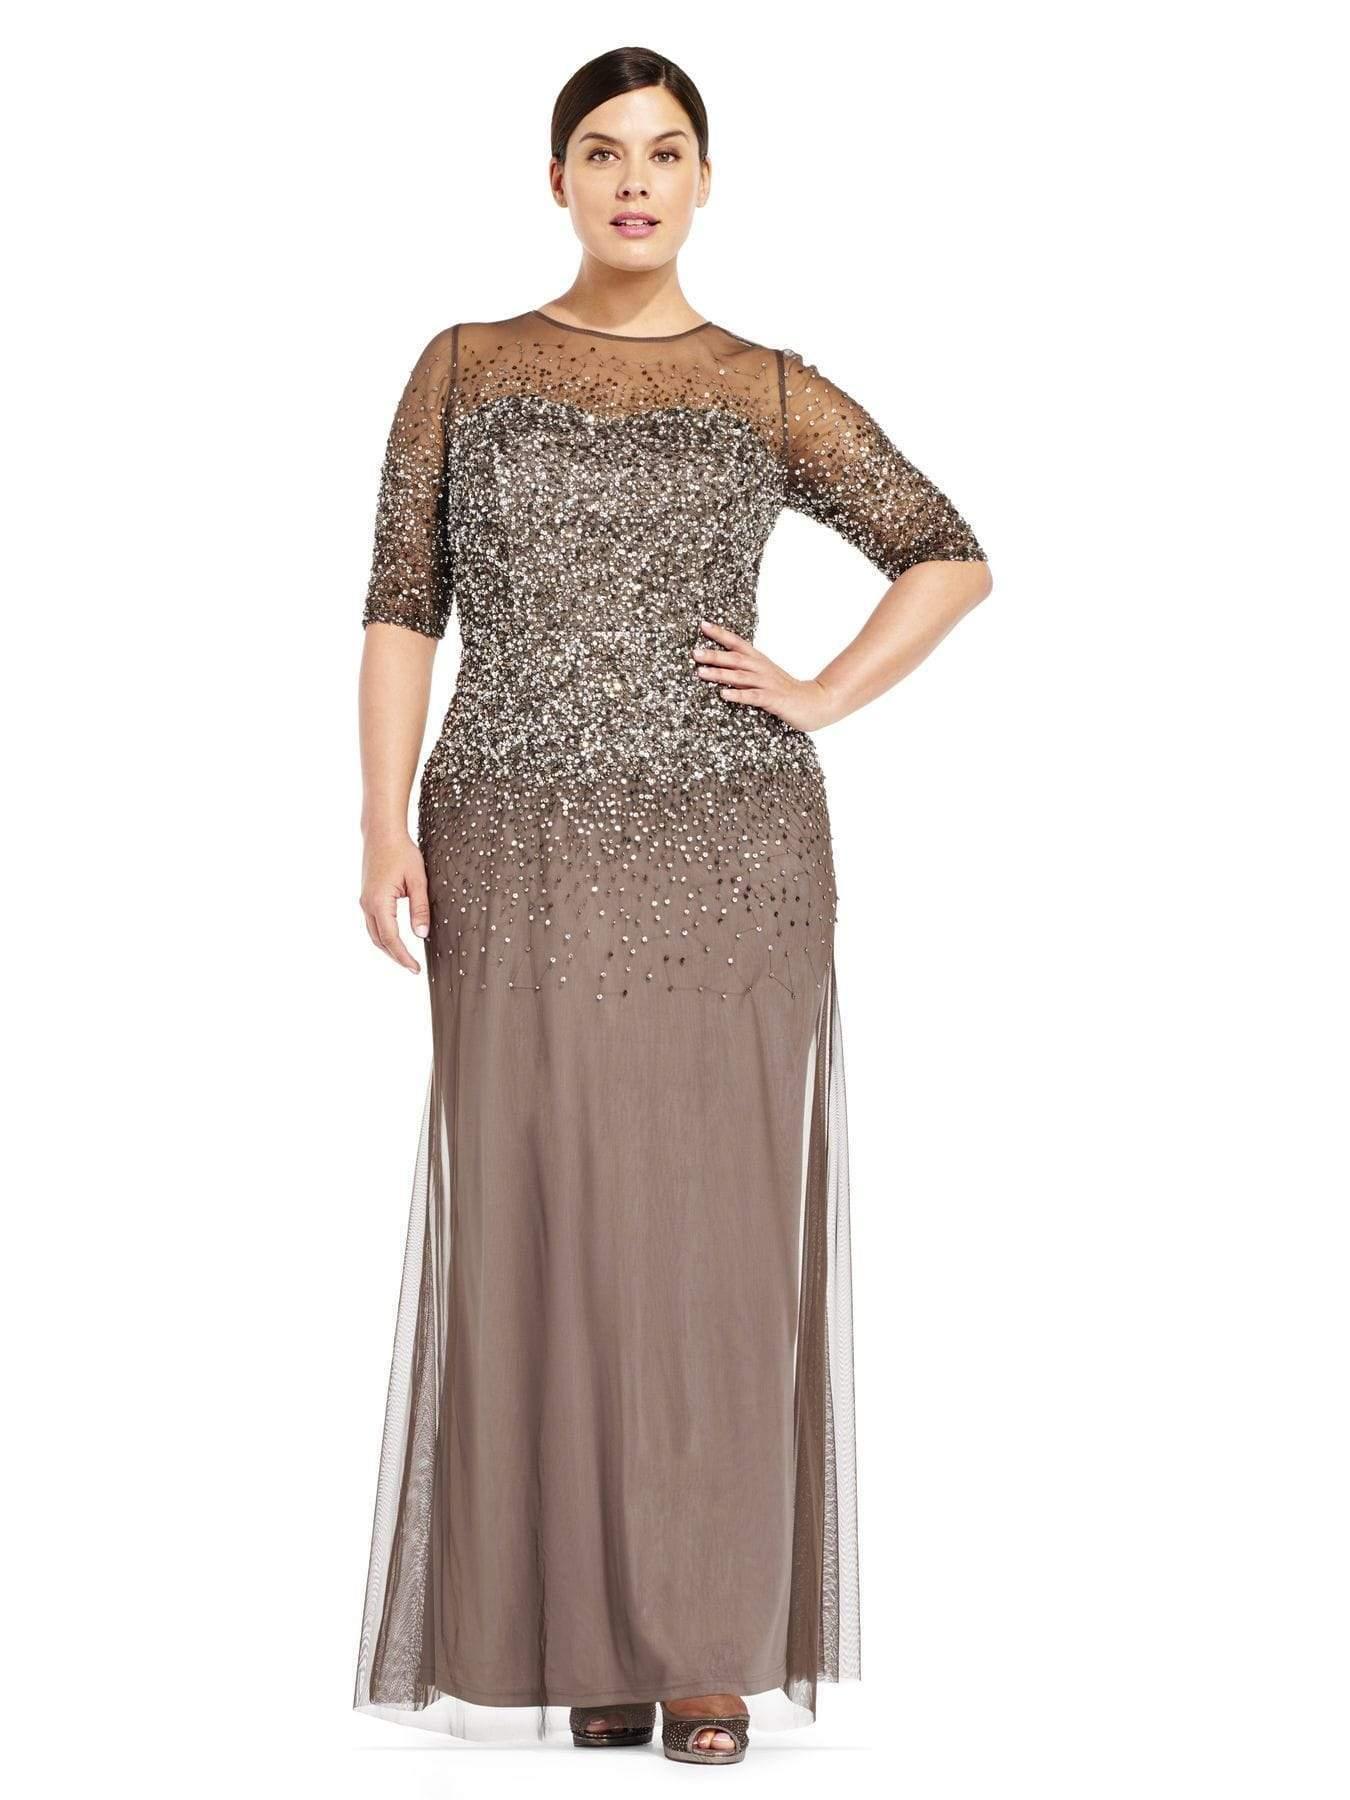 Adrianna Papell Synthetic Beaded Illusion Gown-lead in Gray - Lyst